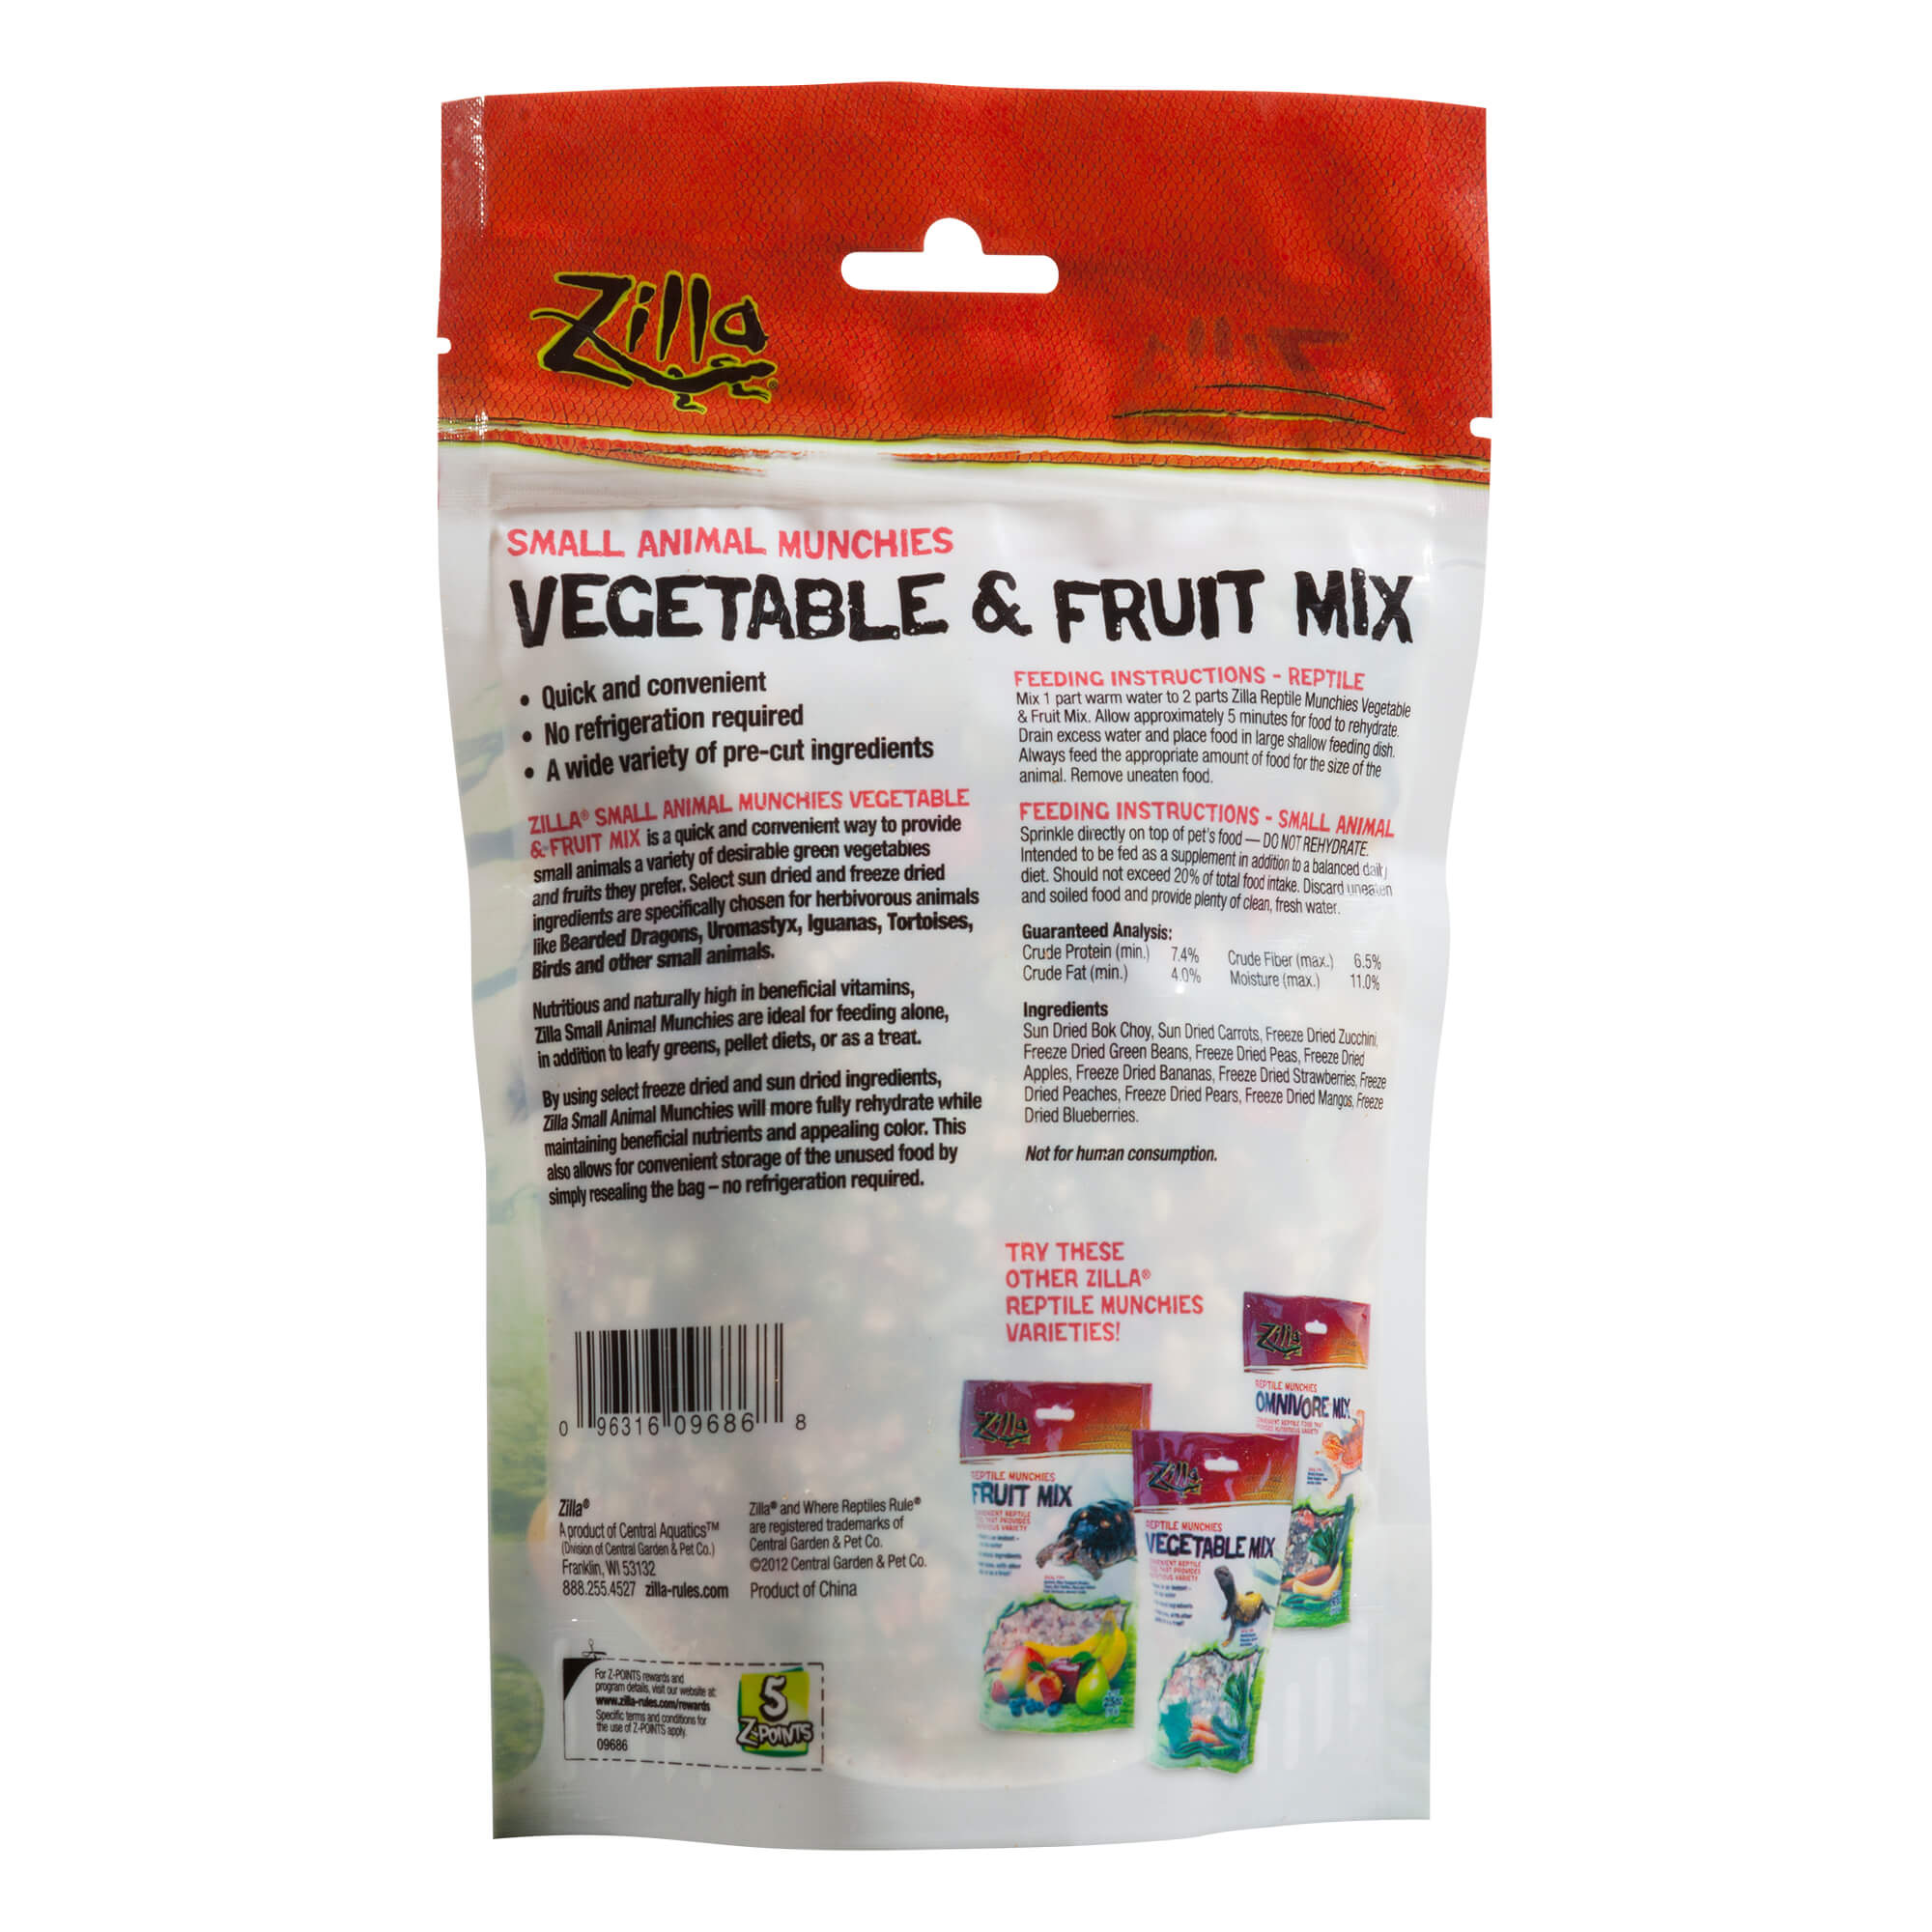 Zilla Vegetable and Fruit Mix Small Animal Munchies Ingredients List